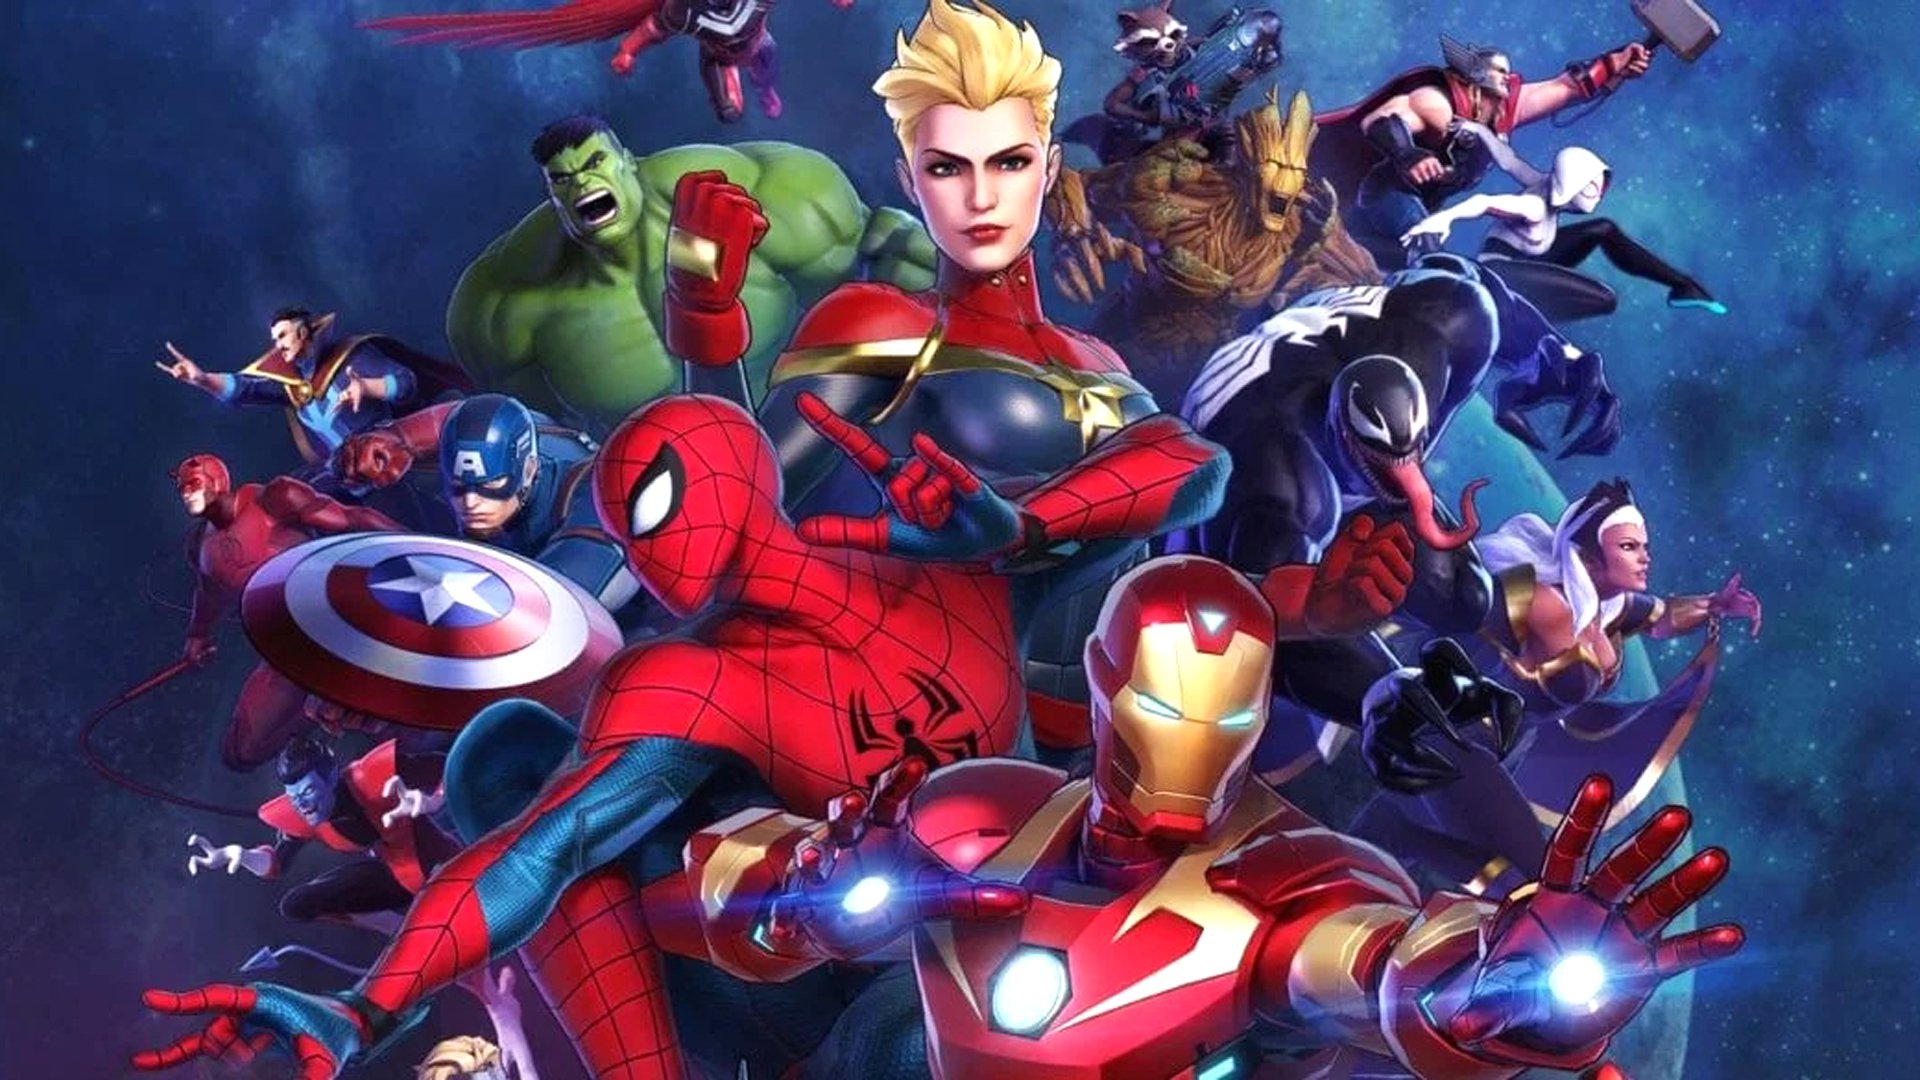 marvel-ultimate-alliance-3-roster-discussed-by-dev-team